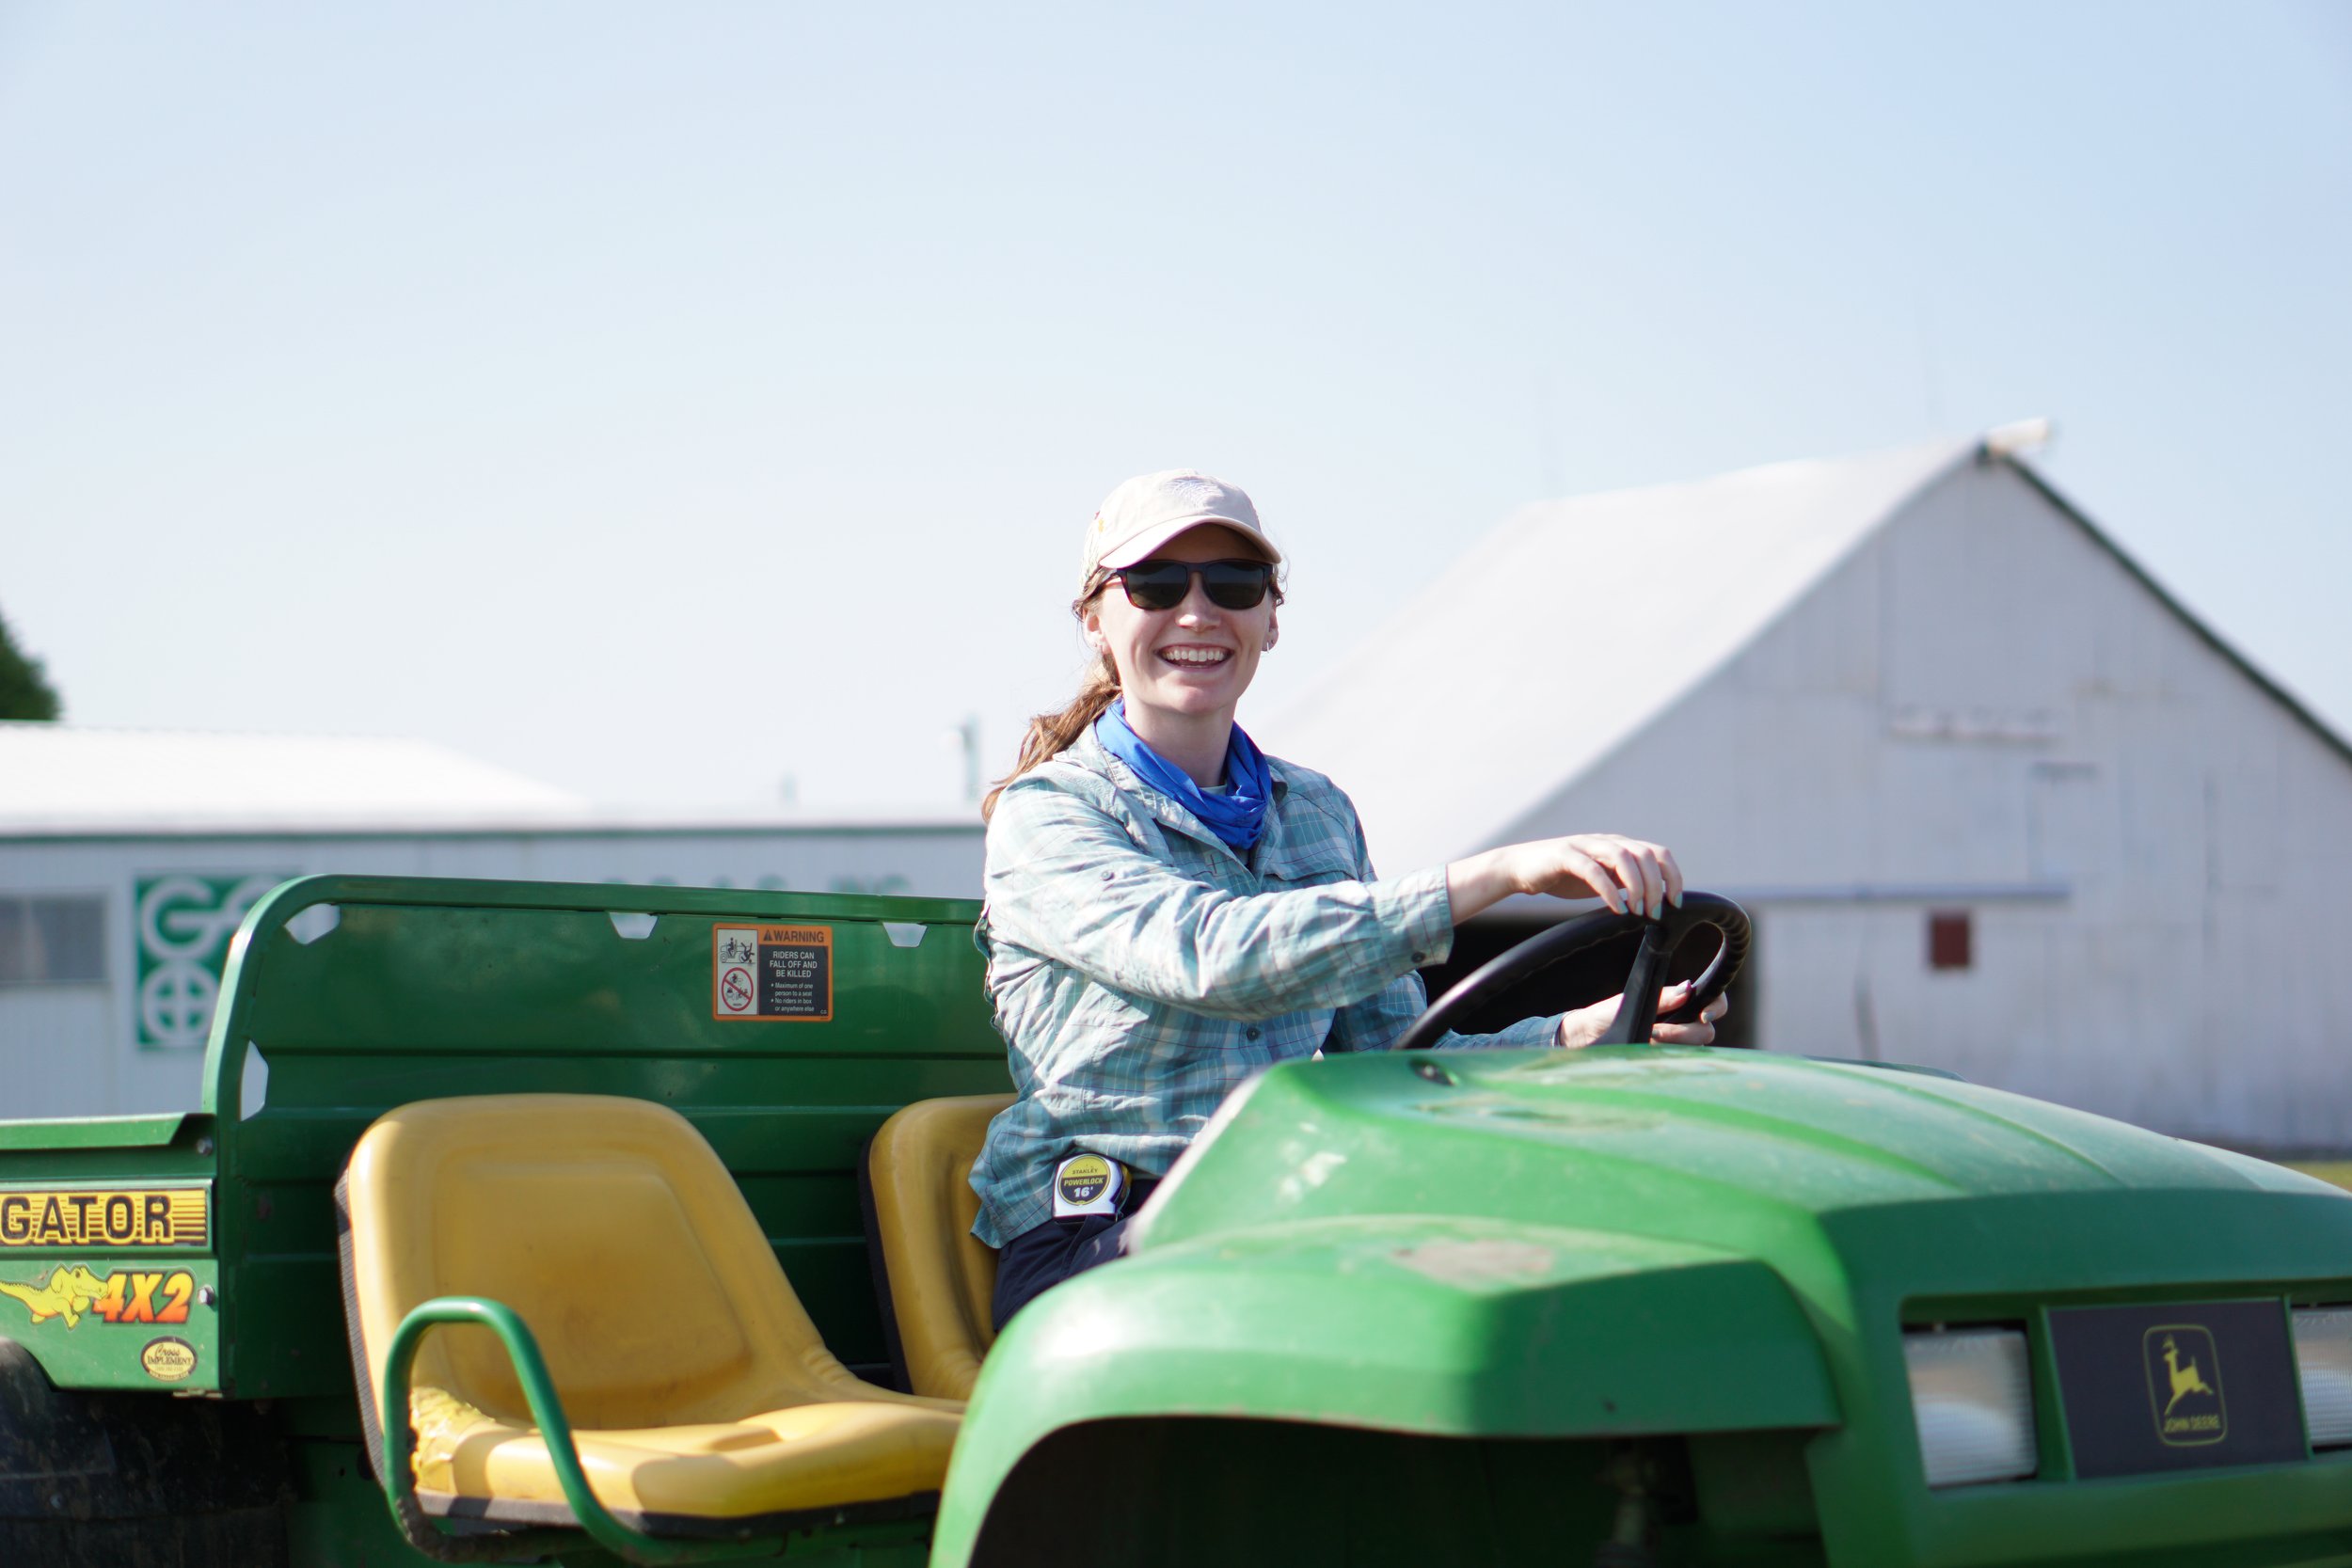  Dr. Murphy drives a “gator” at the Donald Danforth Plant Science Center Field Research Site, where she researches how corn grows under different conditions. Photo credit: Donald Danforth Plant Science Center 